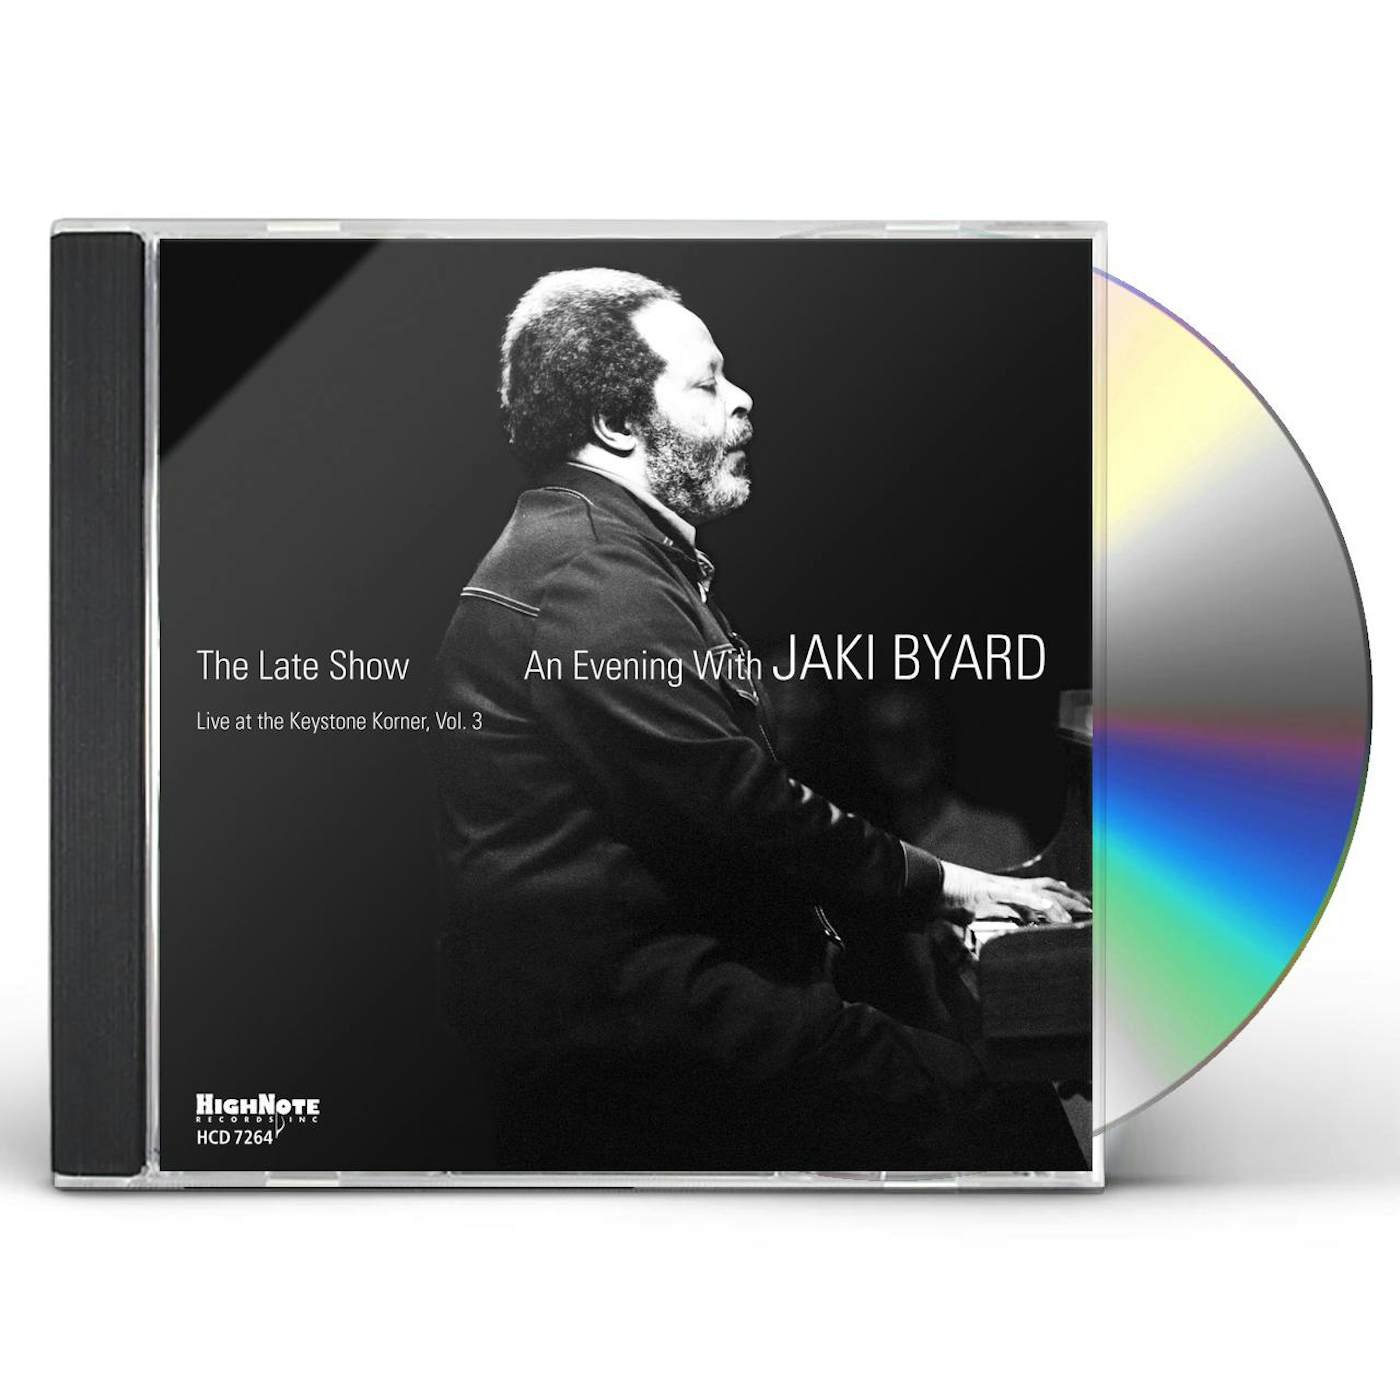 LATE SHOW: AN EVENING WITH JAKI BYARD CD